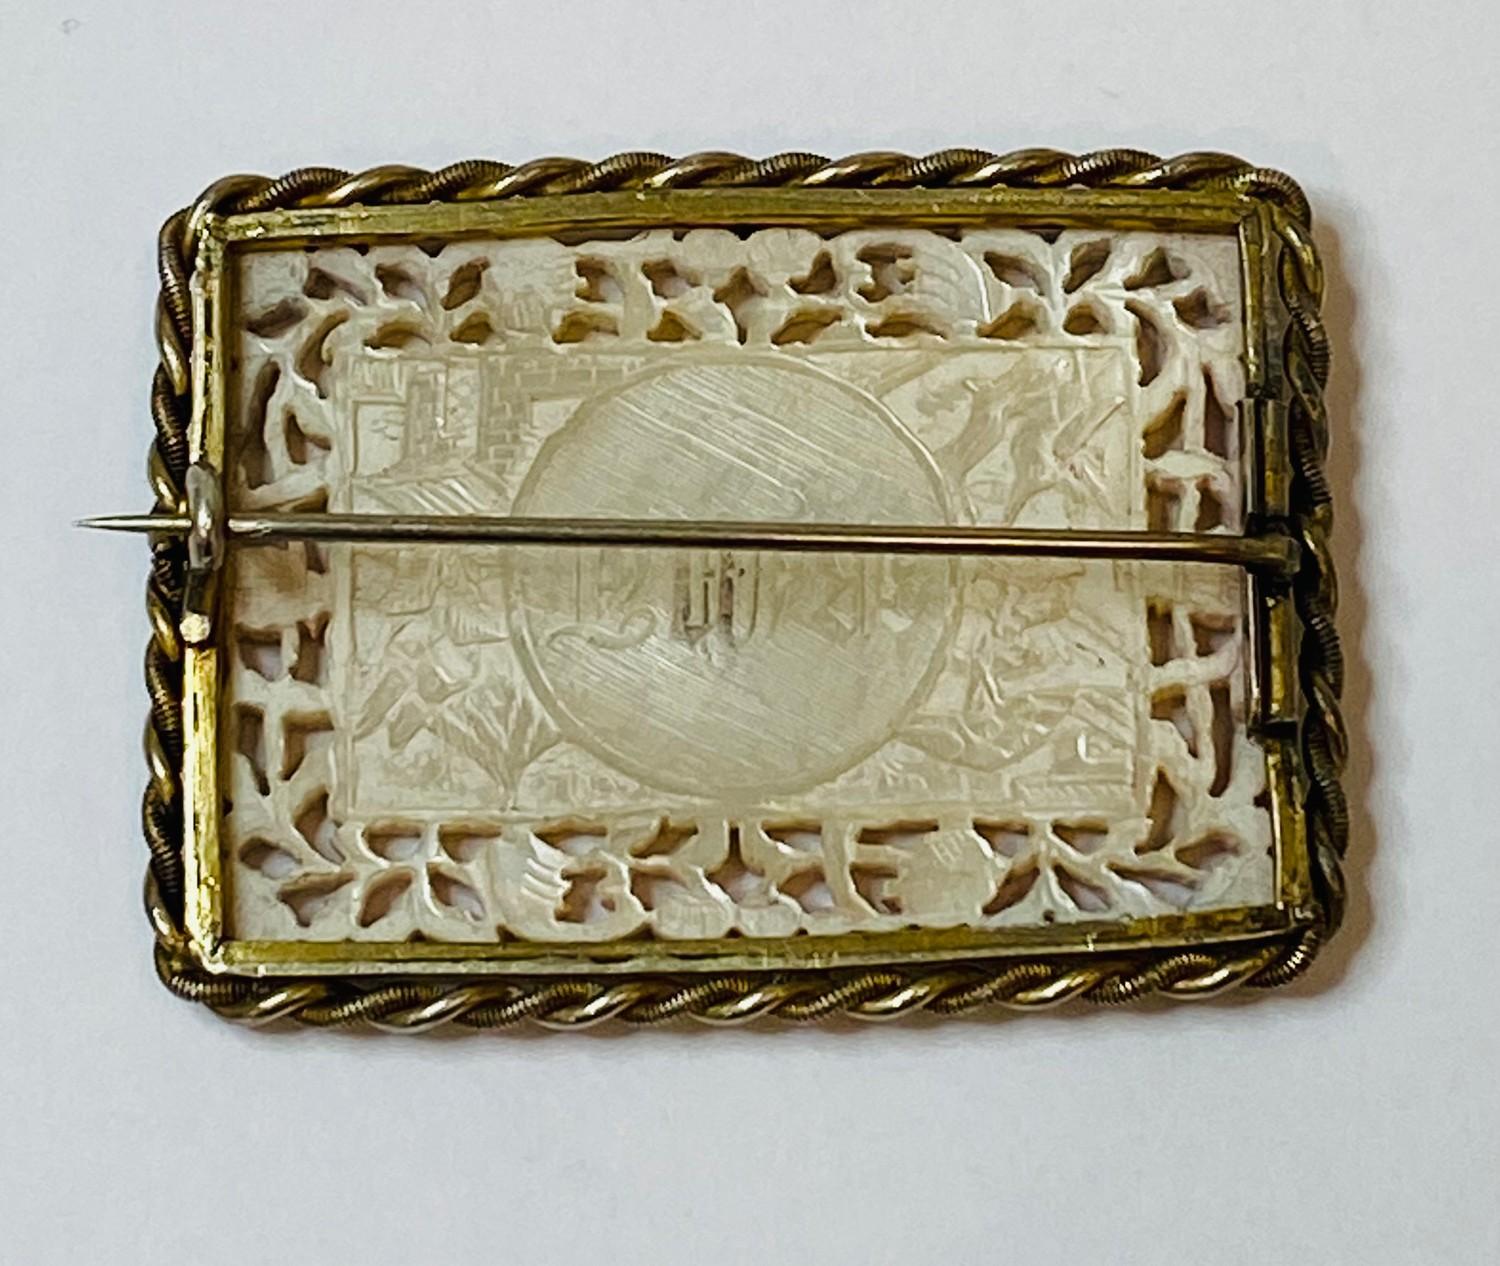 Georgian mother of pearl Chinese gaming token brooch, overall good condition - Image 2 of 5